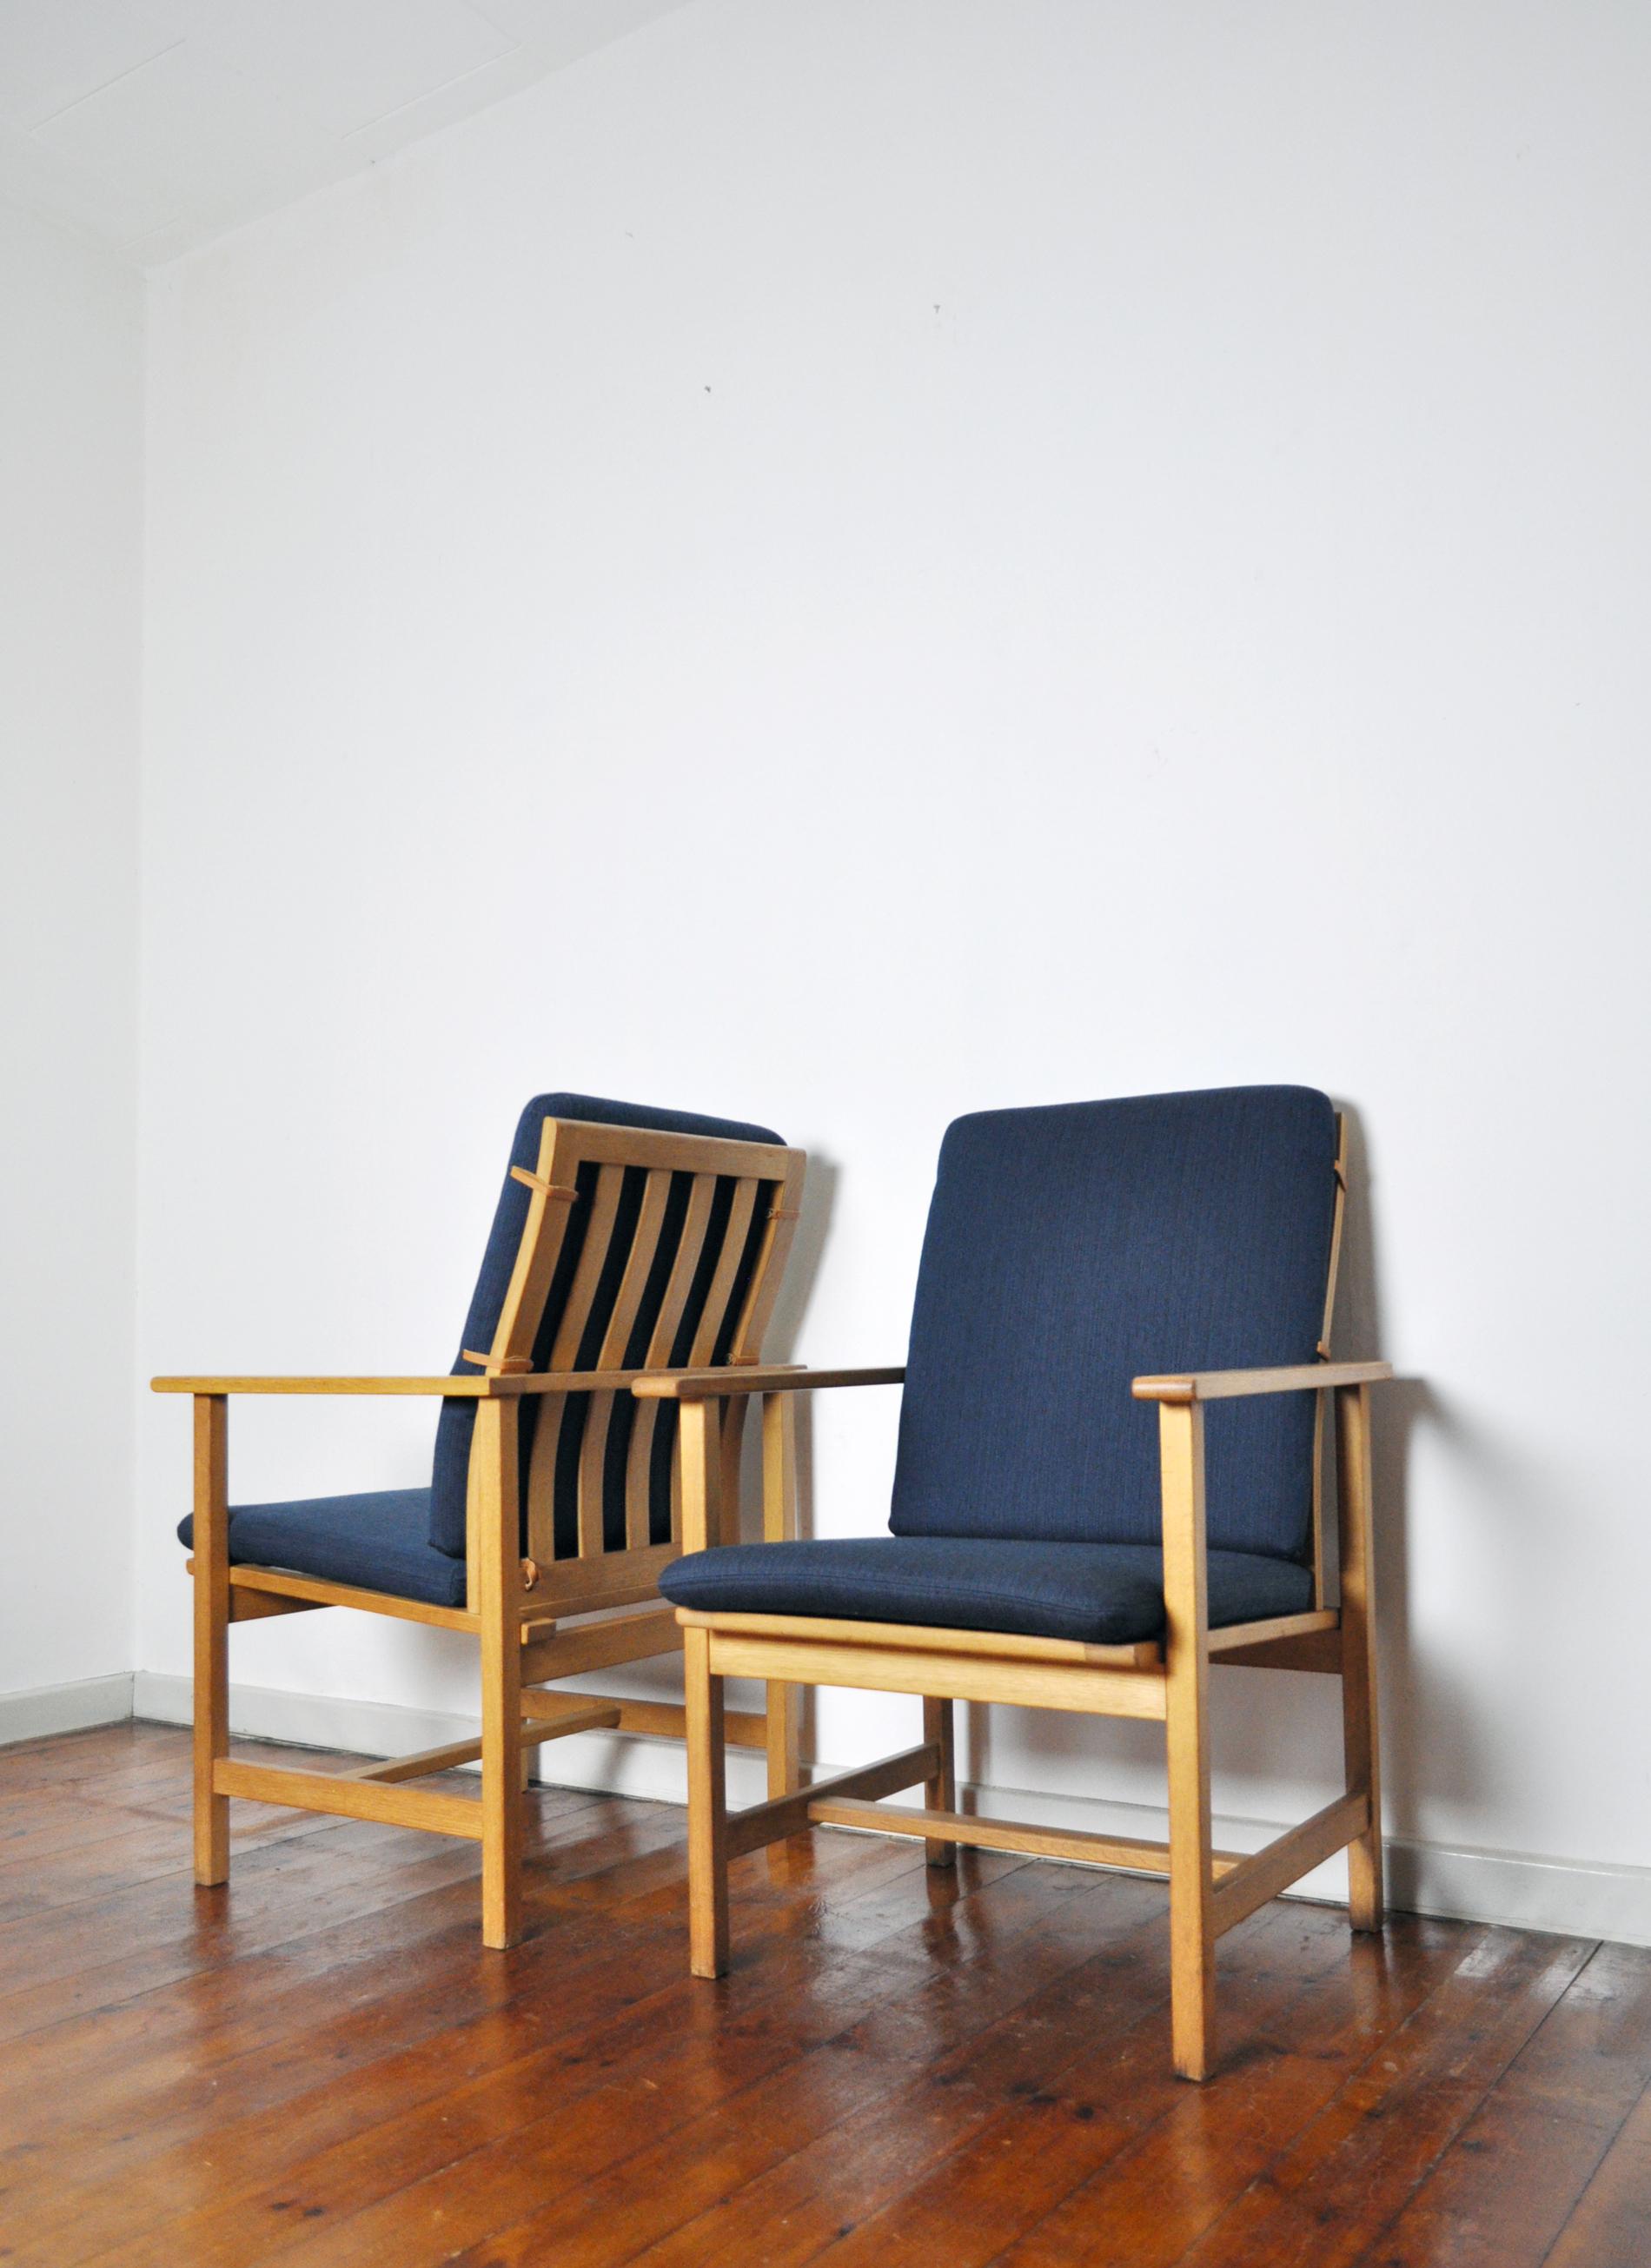 Sharp clean minimalistic design in these Classic oak lounge chairs model 2257 designed by Børge Mogensen for Fredericia Stolefabrik.

New navy blue wool upholstery with leather straps. Oak frame gently refurnished.
Labelled by